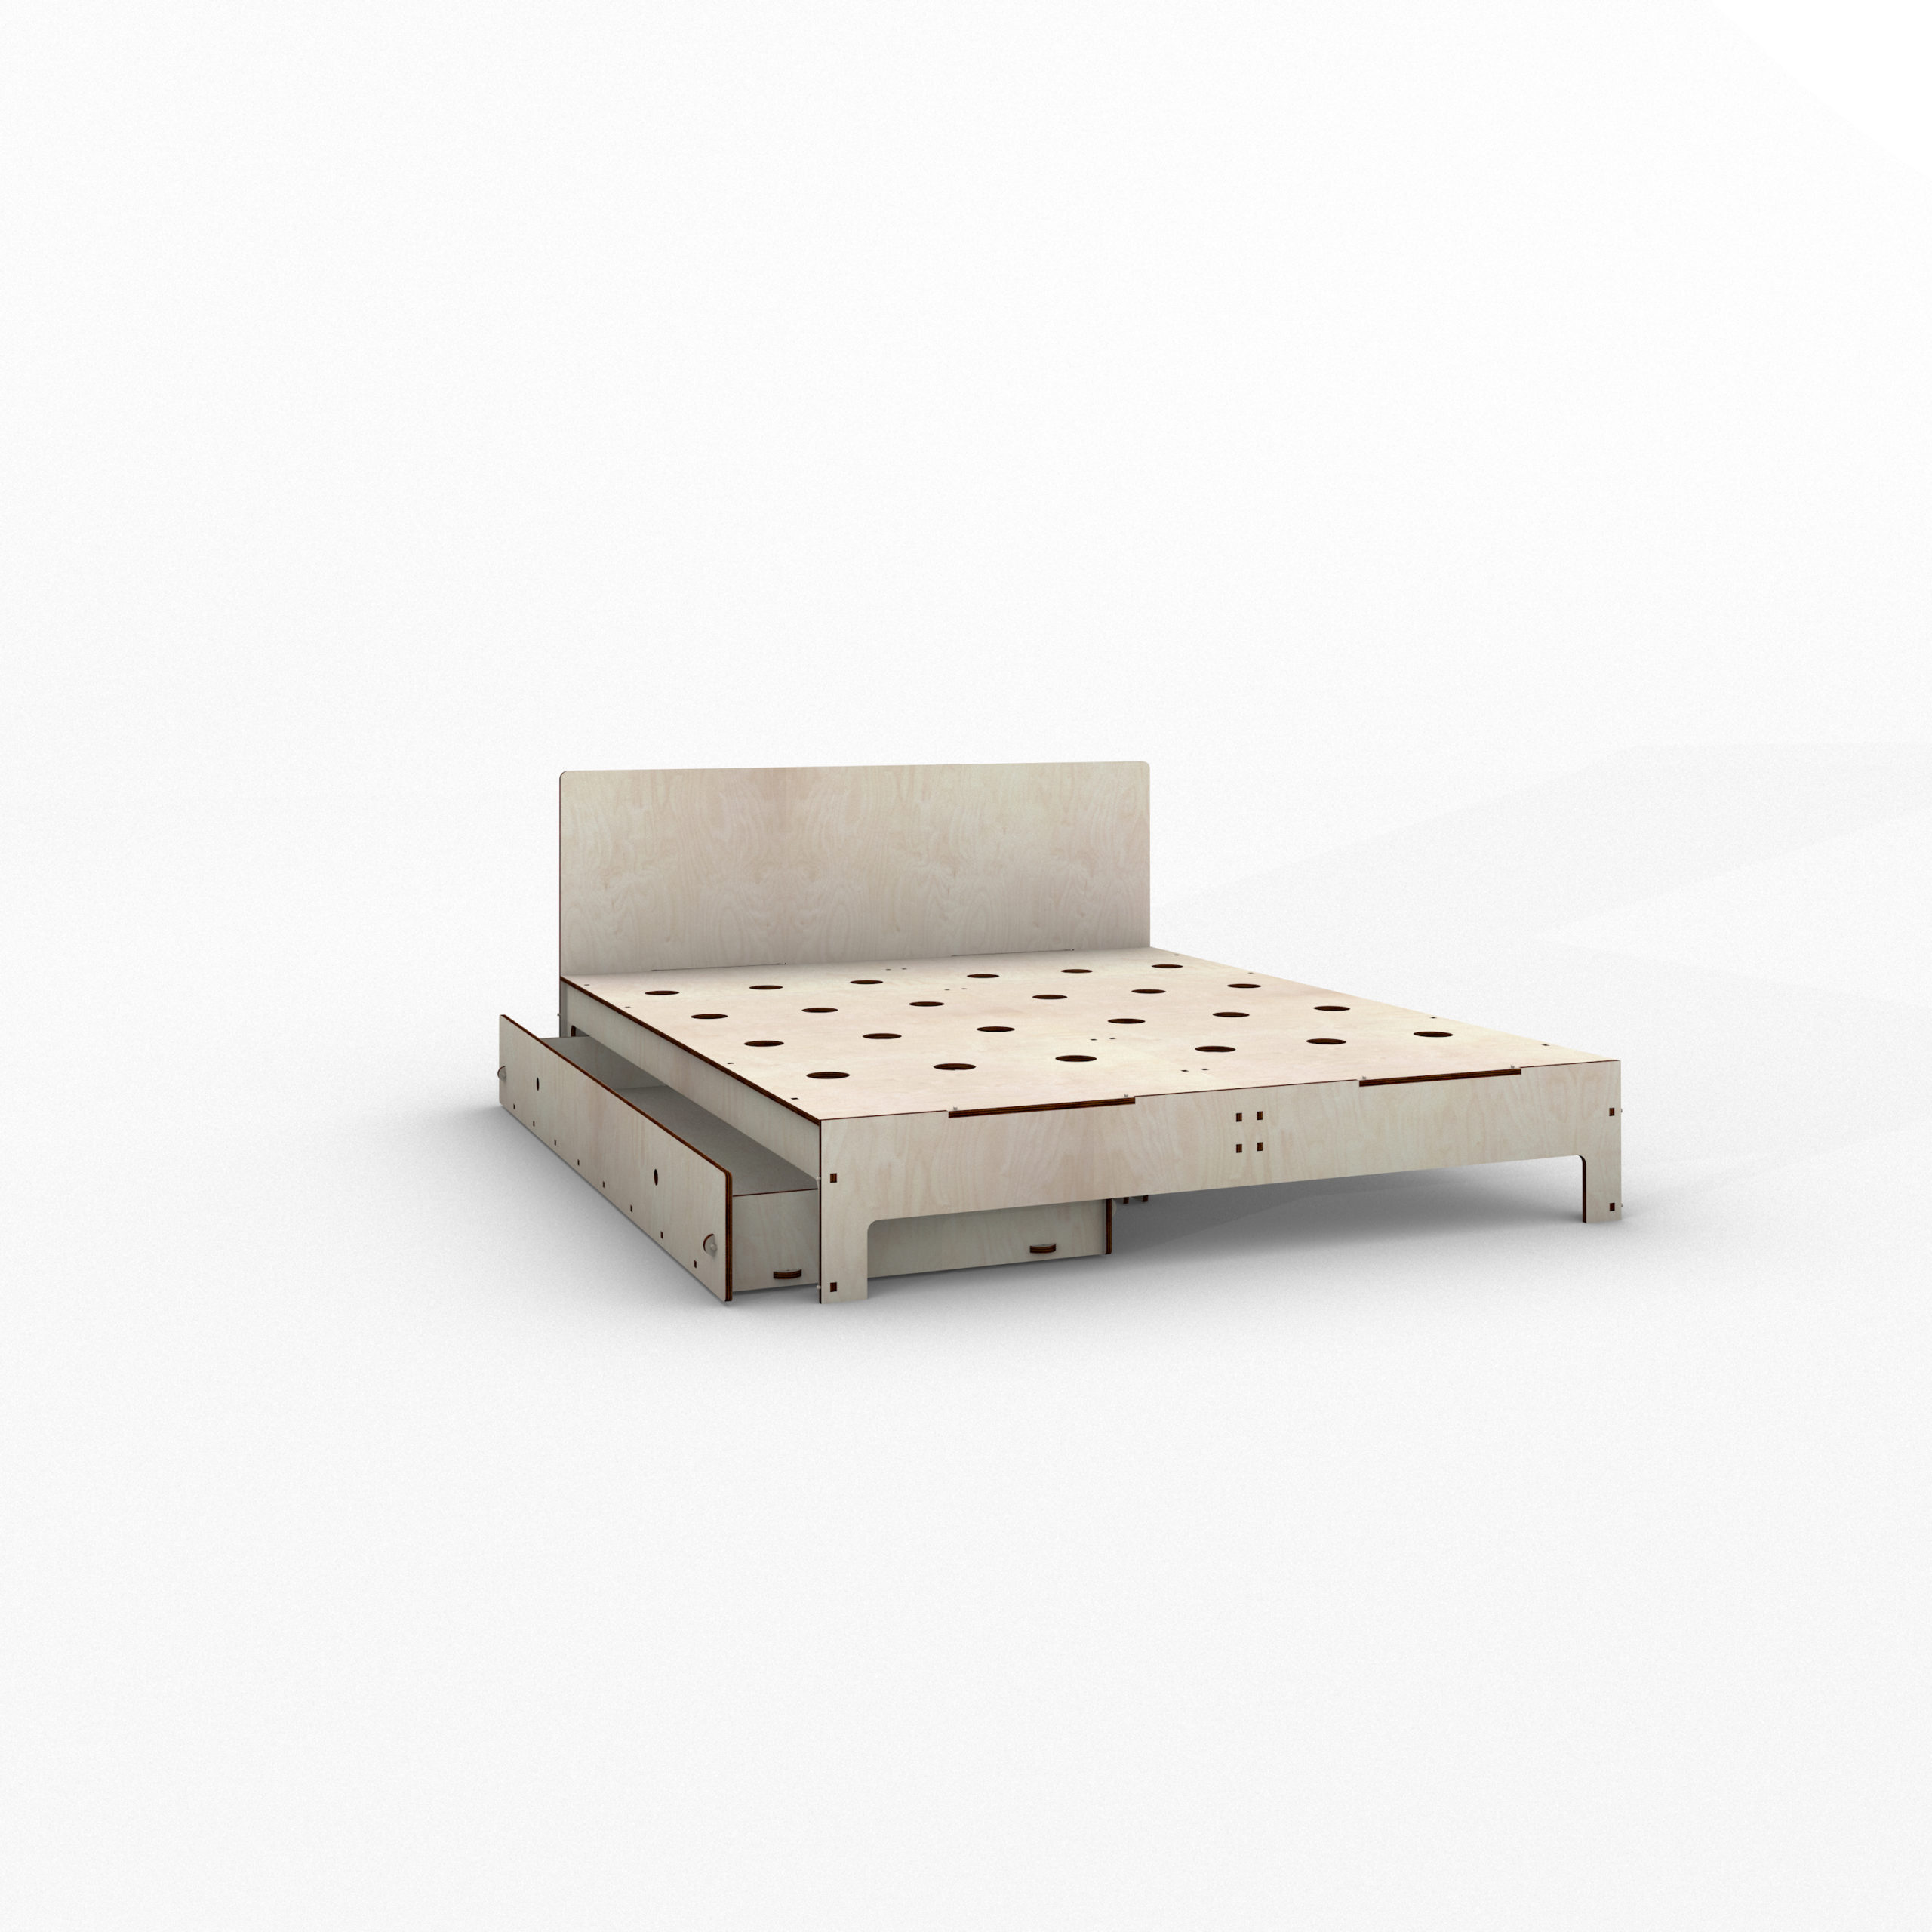 https://totem.ws/wp-content/uploads/2021/04/letto-matrimoniale-in-legno-L7-1g-scaled.jpg